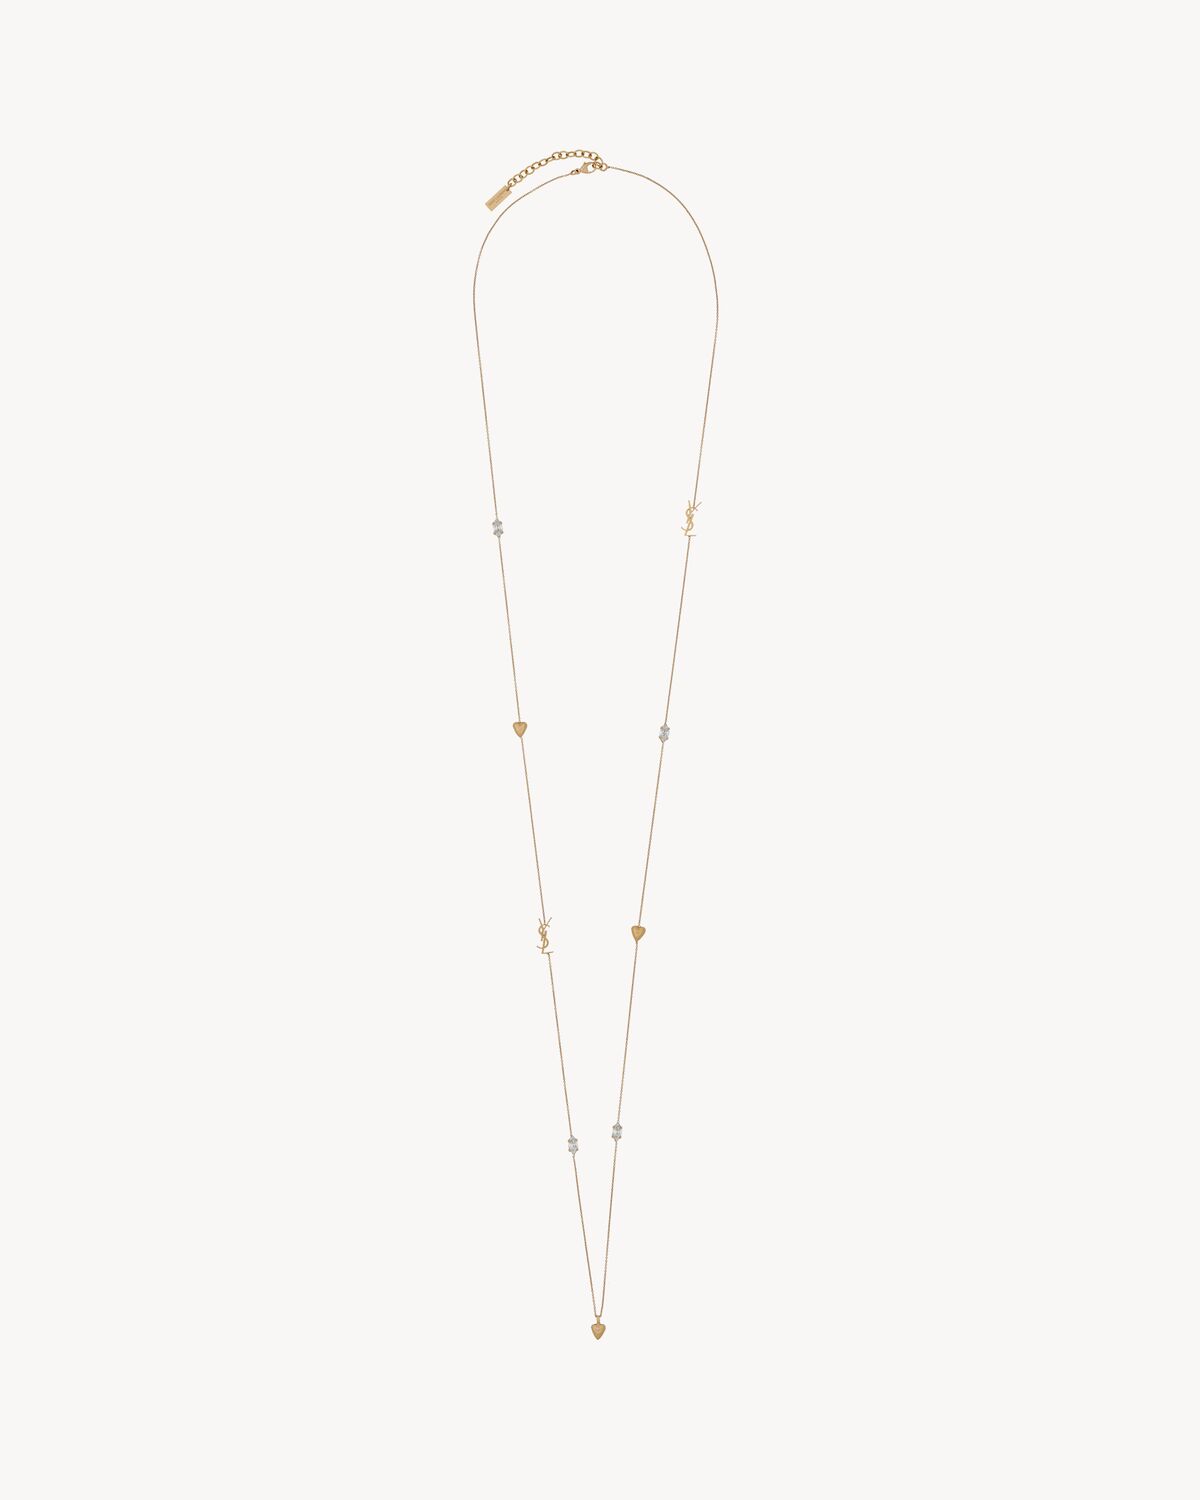 CASSANDRE, heart and rhinestone long necklace in metal